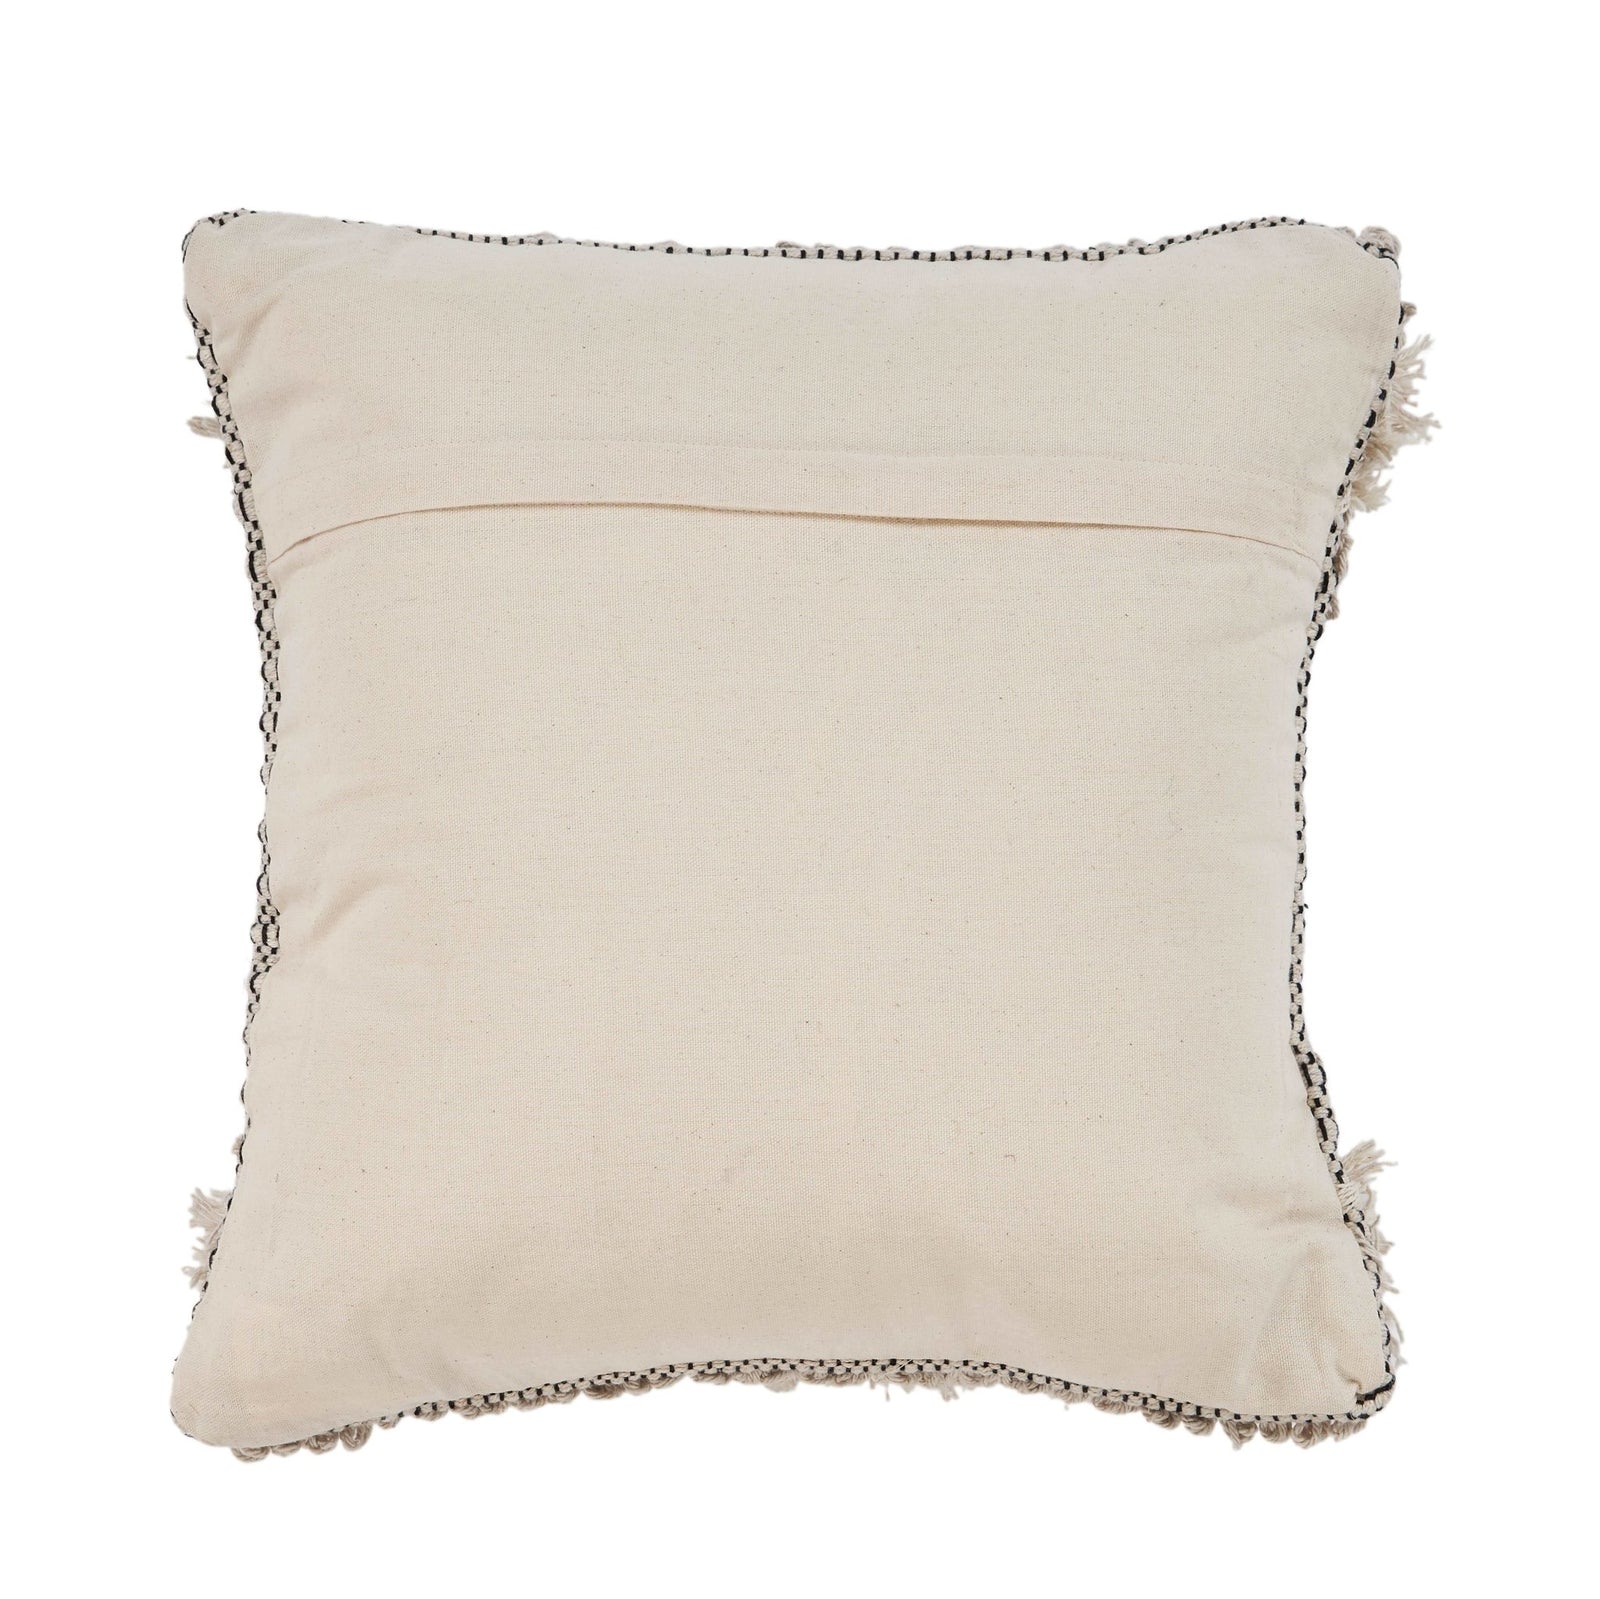 Hygge Cottage LR07320 Throw Pillow - Rug & Home